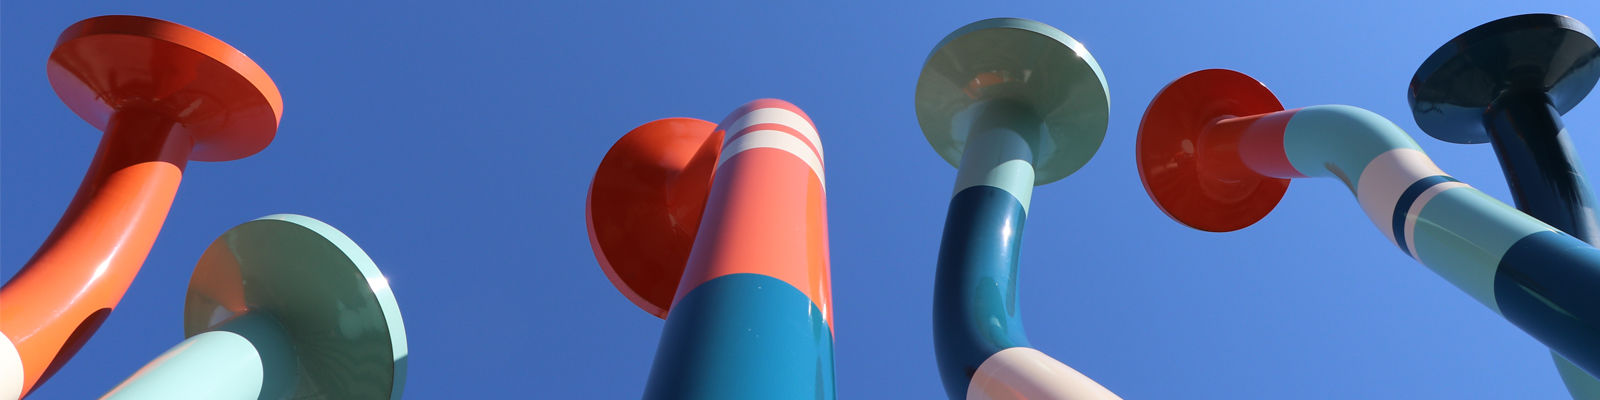 Image of Christian Moeller’s “Nails” sculpture. Brightly painted, and large-scale nails reach toward the sky next to Sound Transit’s Link light rail base in BelRed.